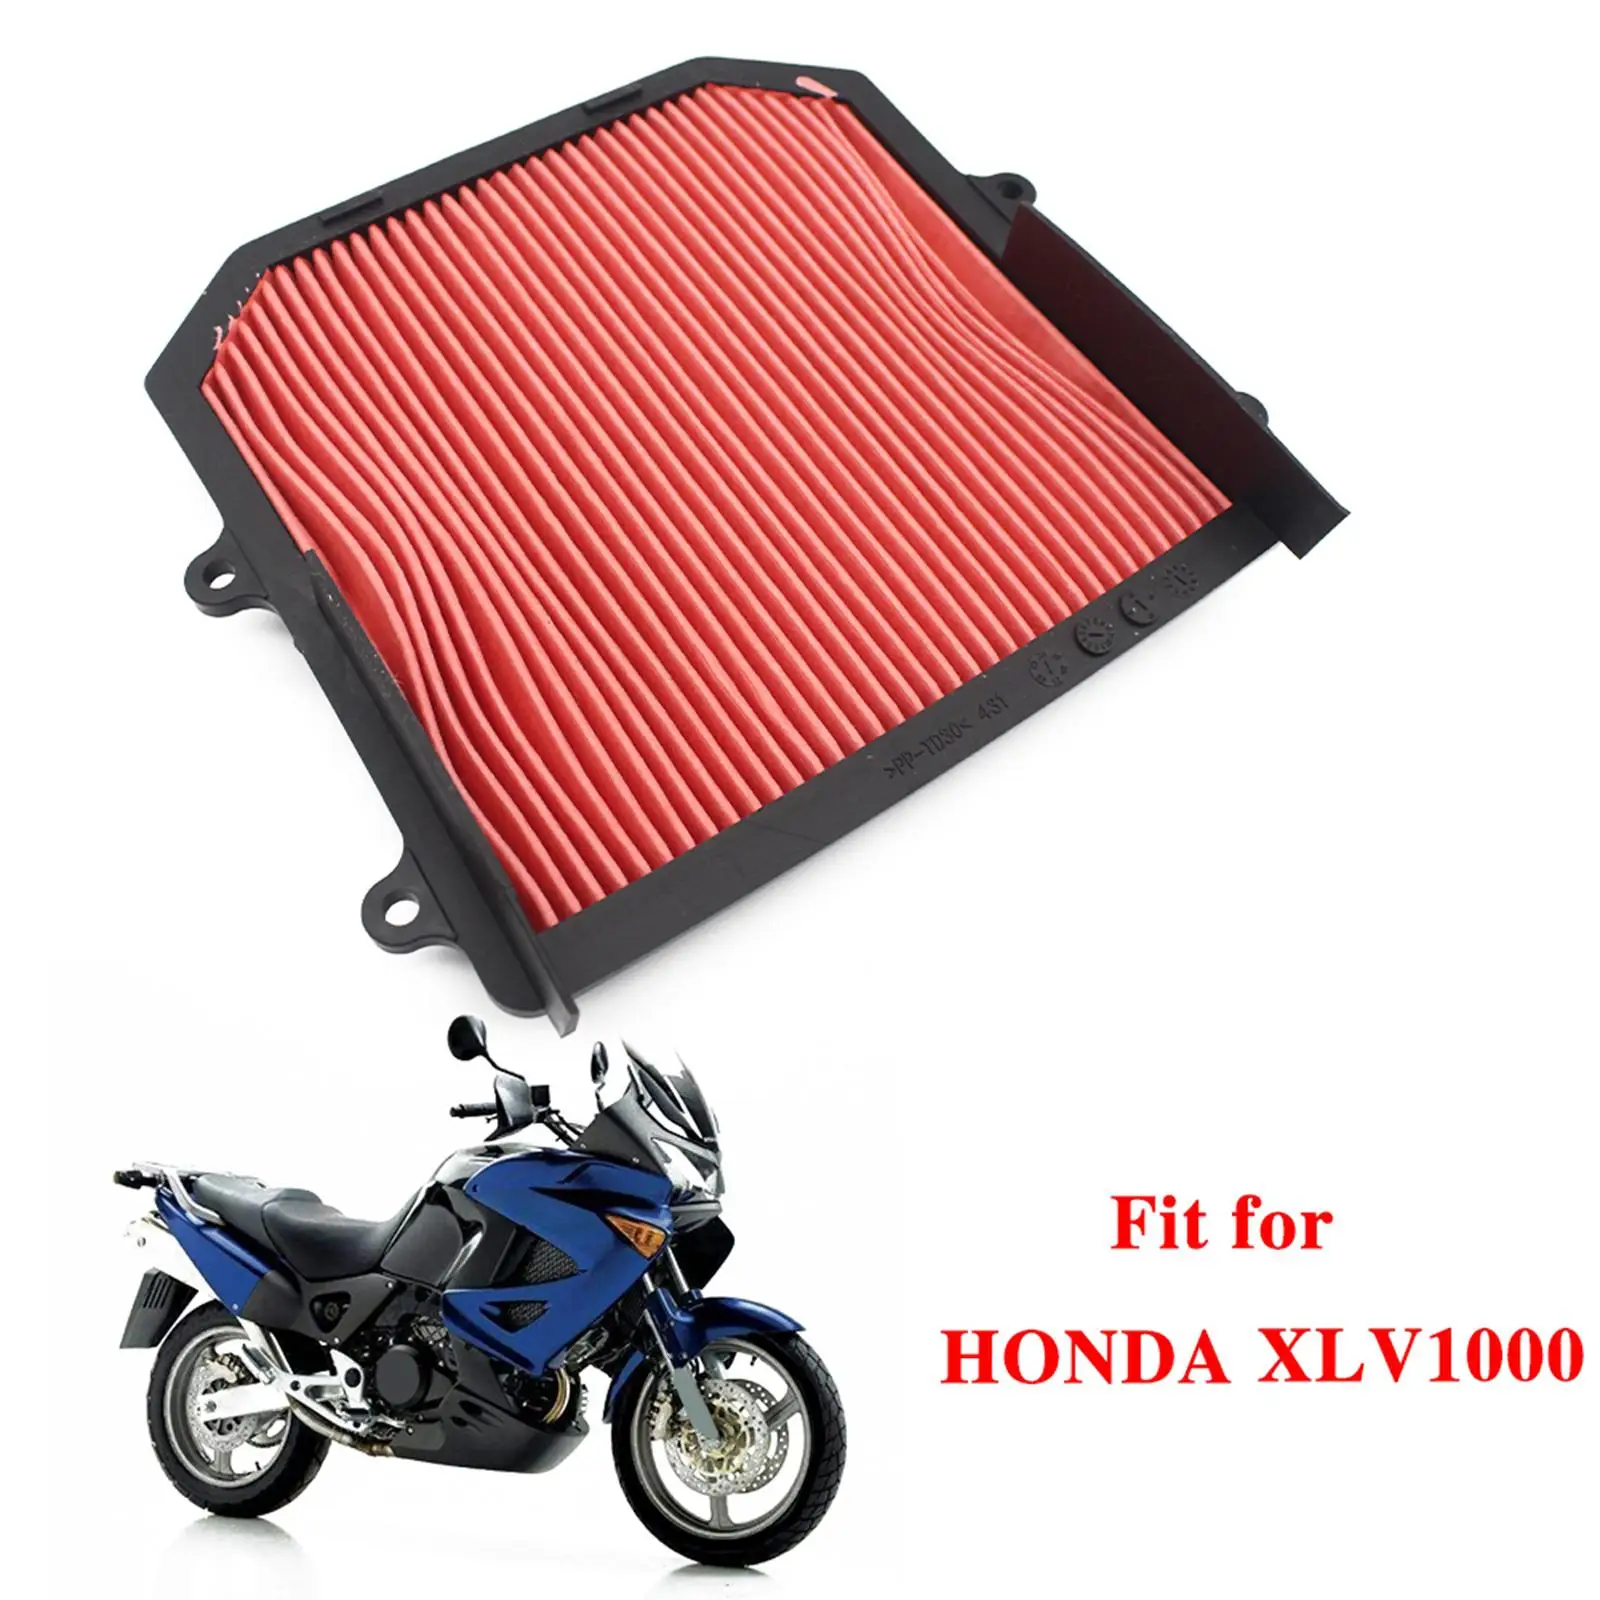 Motorcycle Air Filter Intake Cleaner Red Cotton Replacement Fit for Honda XL1000V Xlv1000 Varadero 2003-11 Supplies Moulding